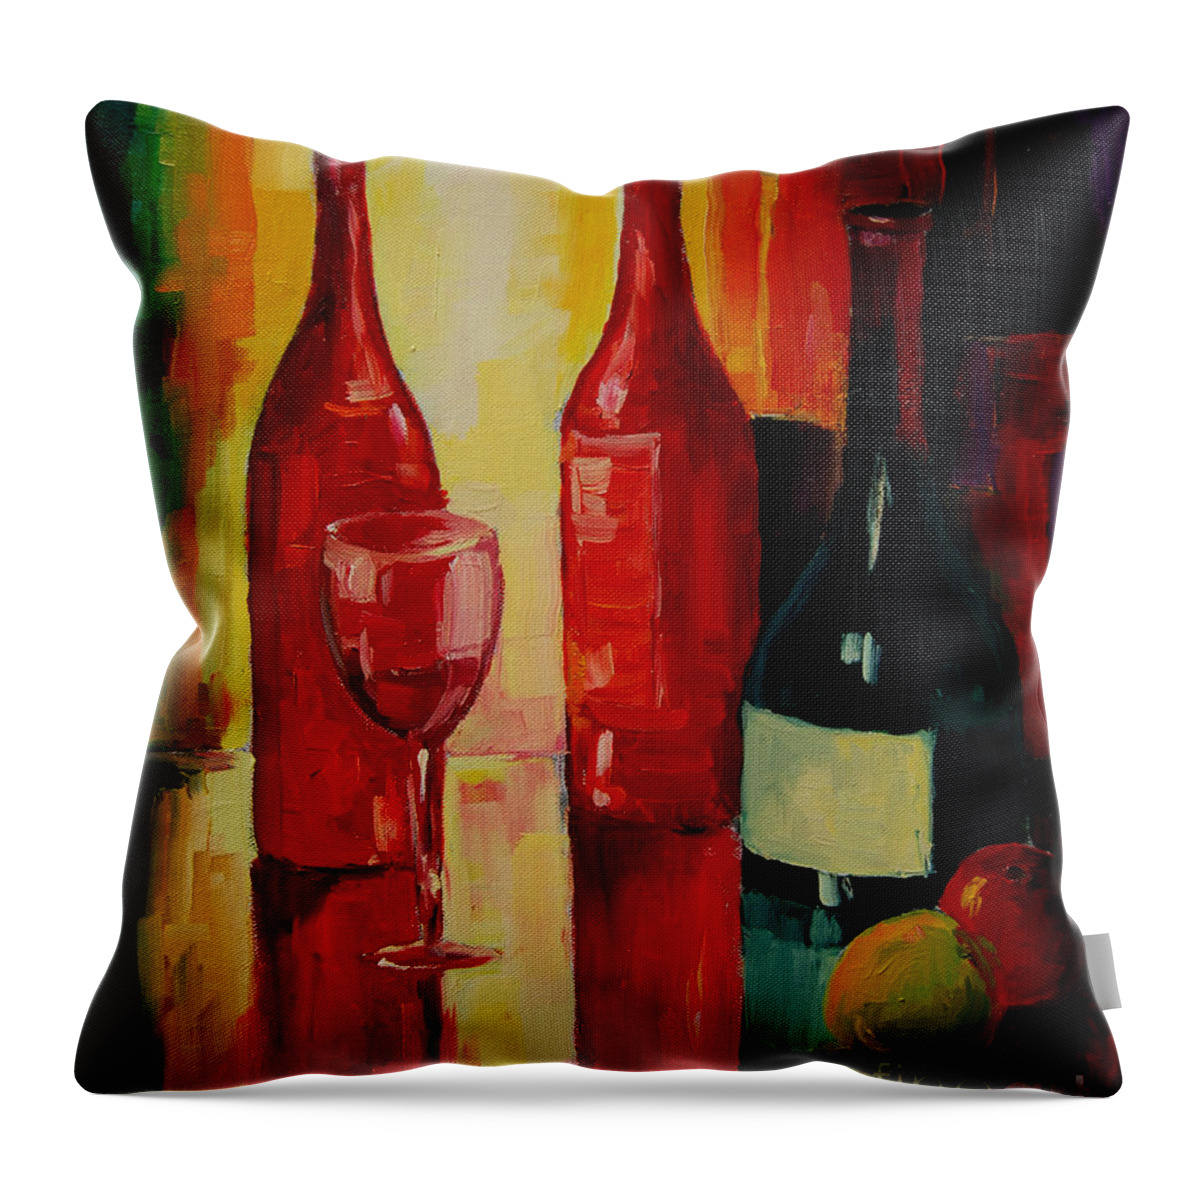 Reflections Throw Pillow featuring the painting Reflections by Mona Edulesco